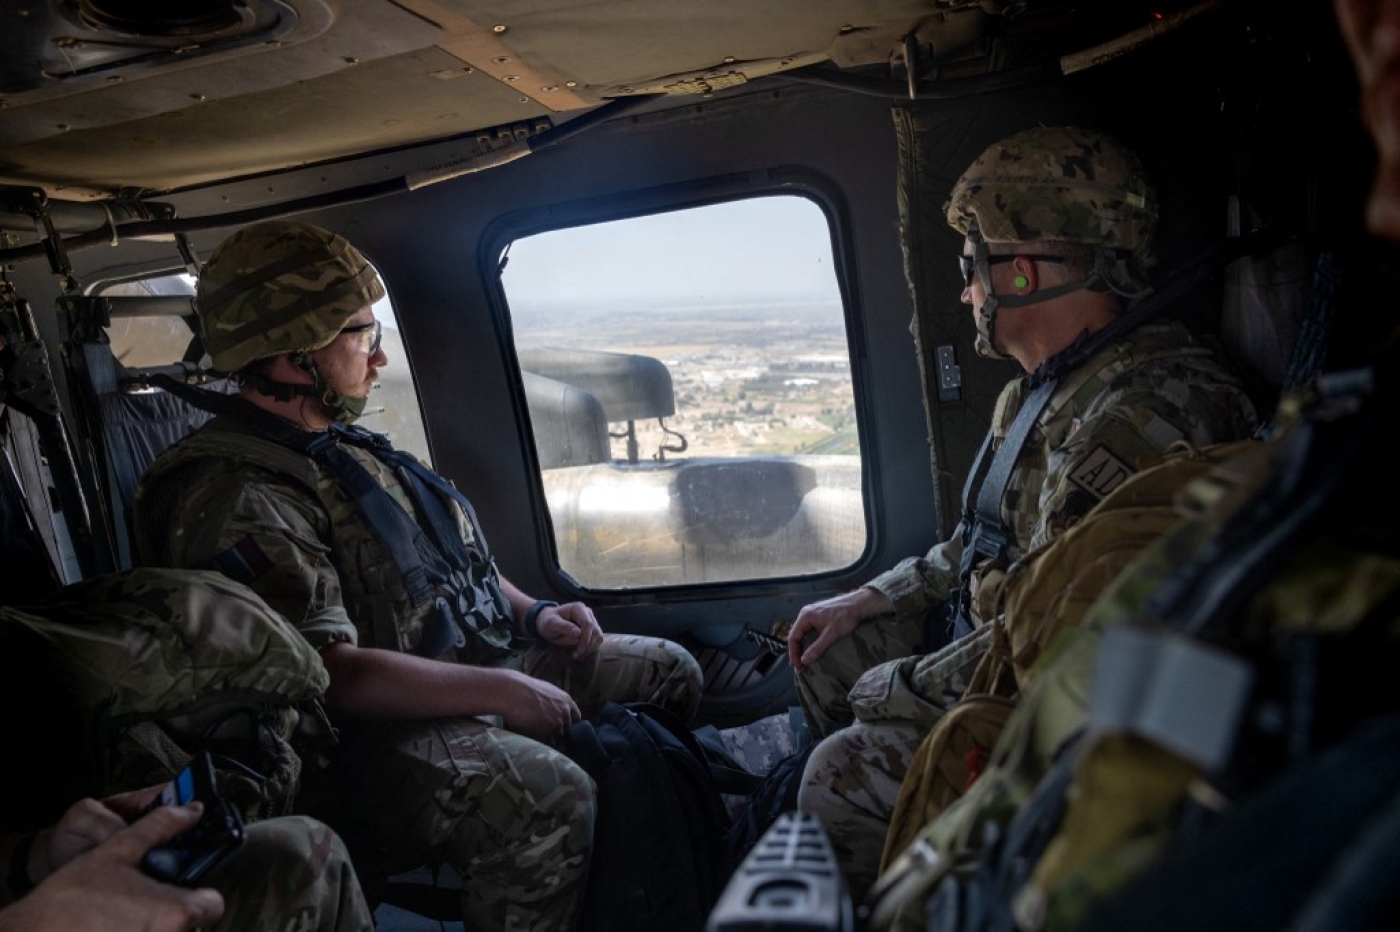 Coalition soldiers fly to Baghdad in a US Blackhawk helicopter on 31 May 2021.